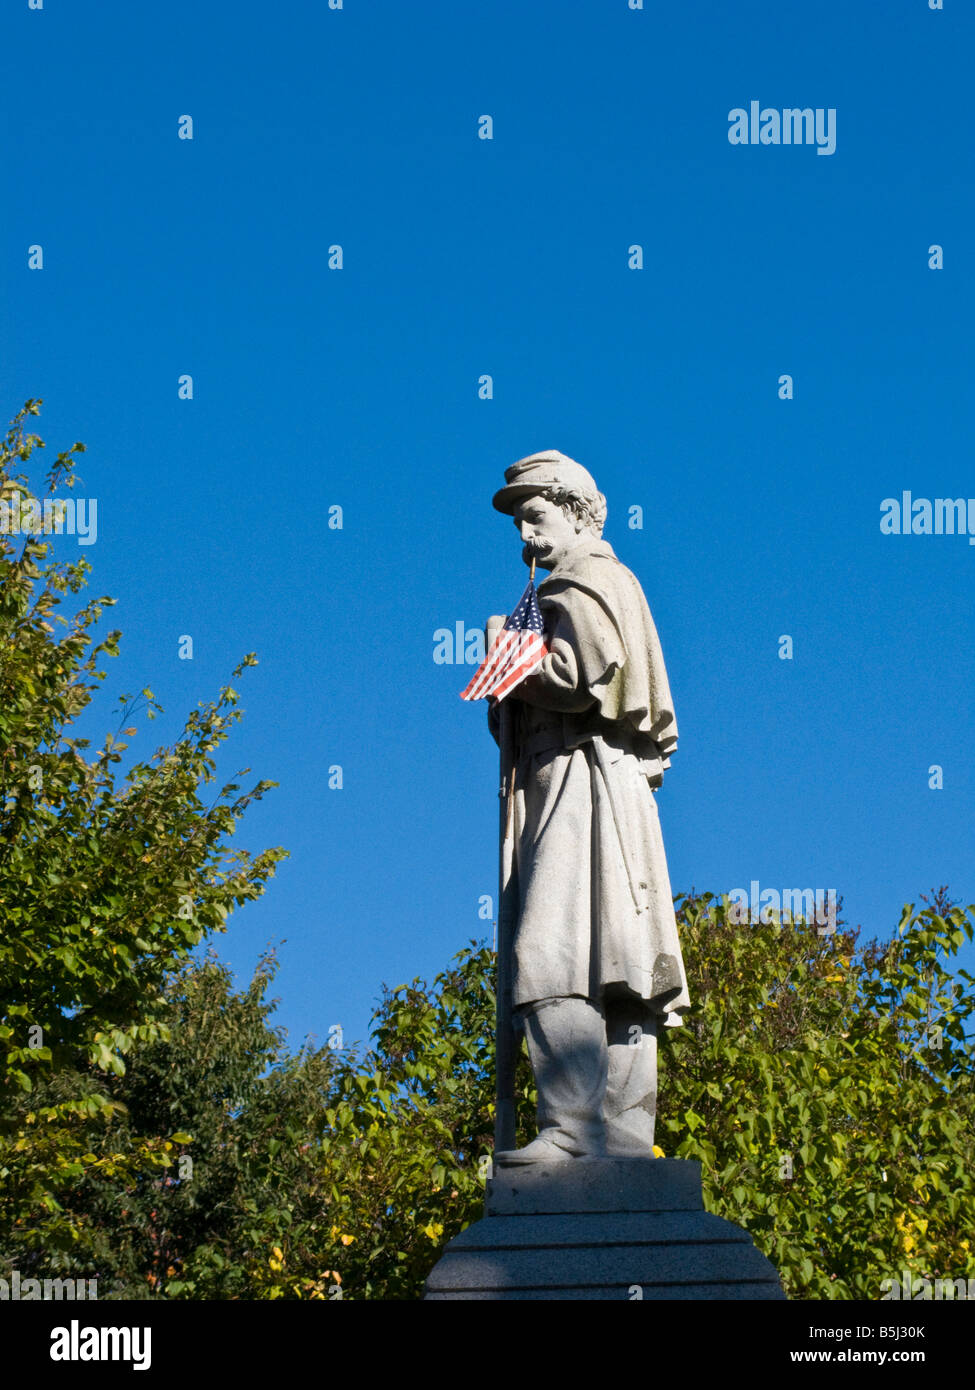 A Civil War or Great Rebellion Monument in Camden Maine United States Stock Photo